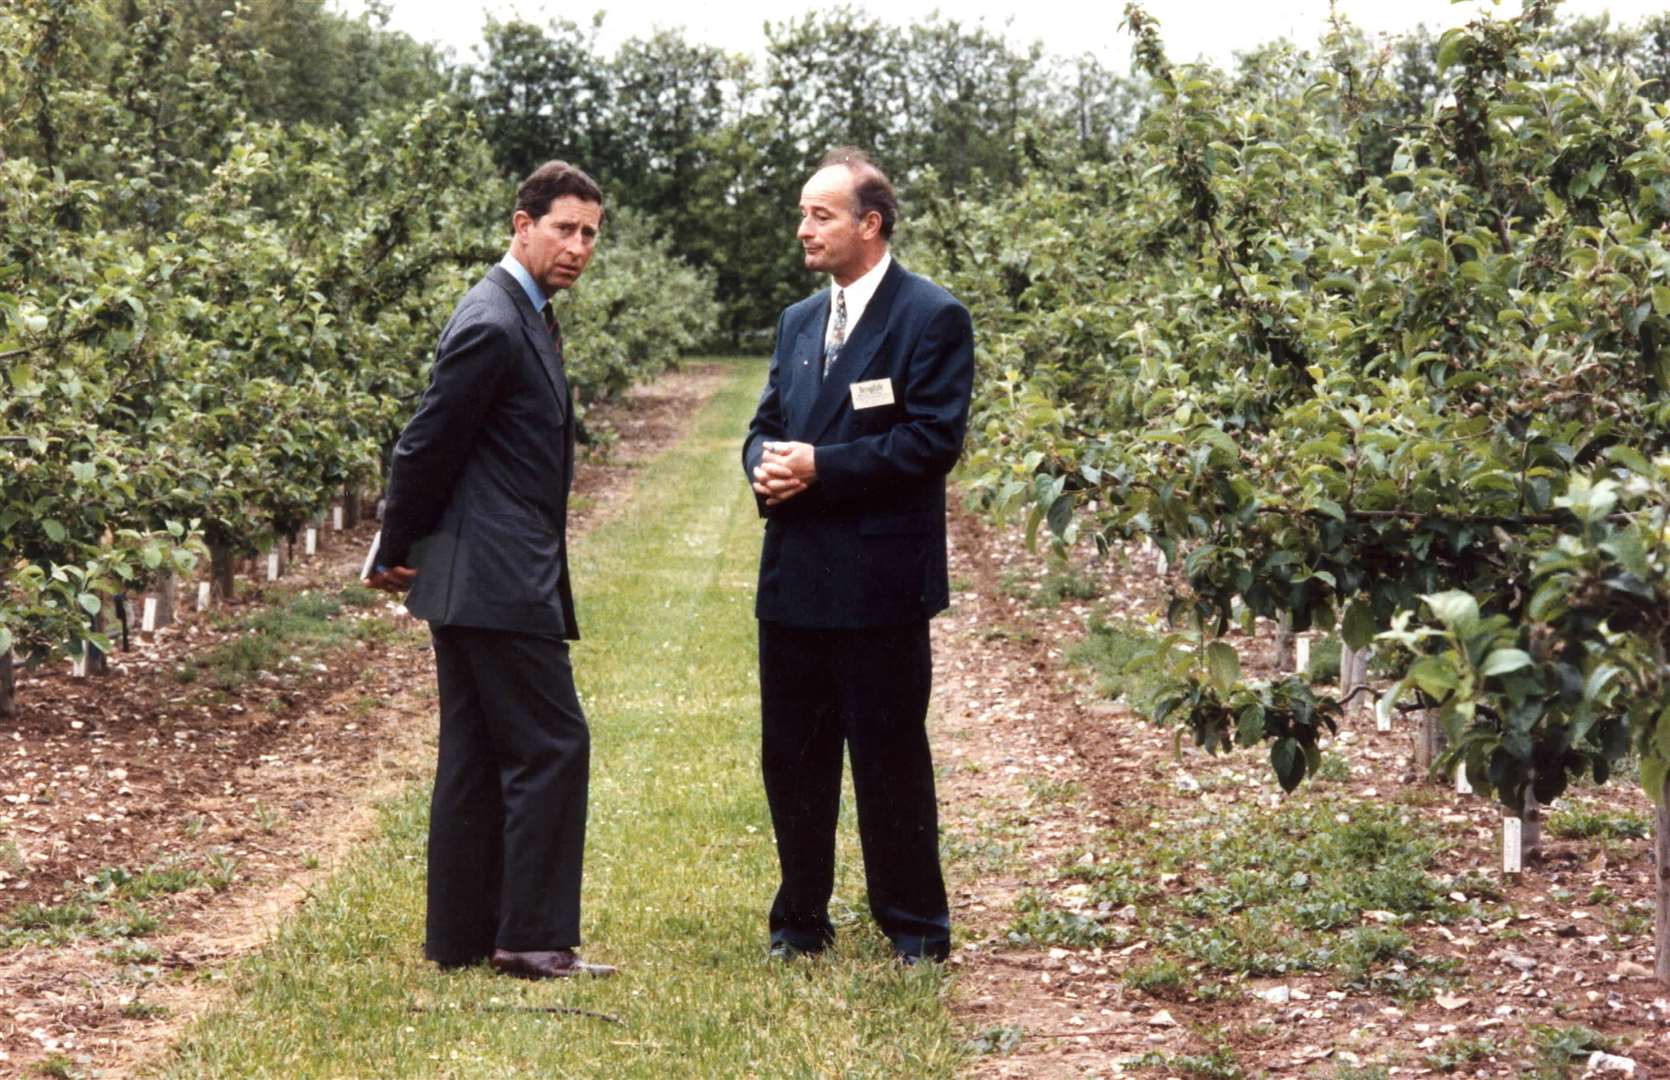 A visit by Prince Charles to Brogdale Fruit Farm in Faversham in 1991